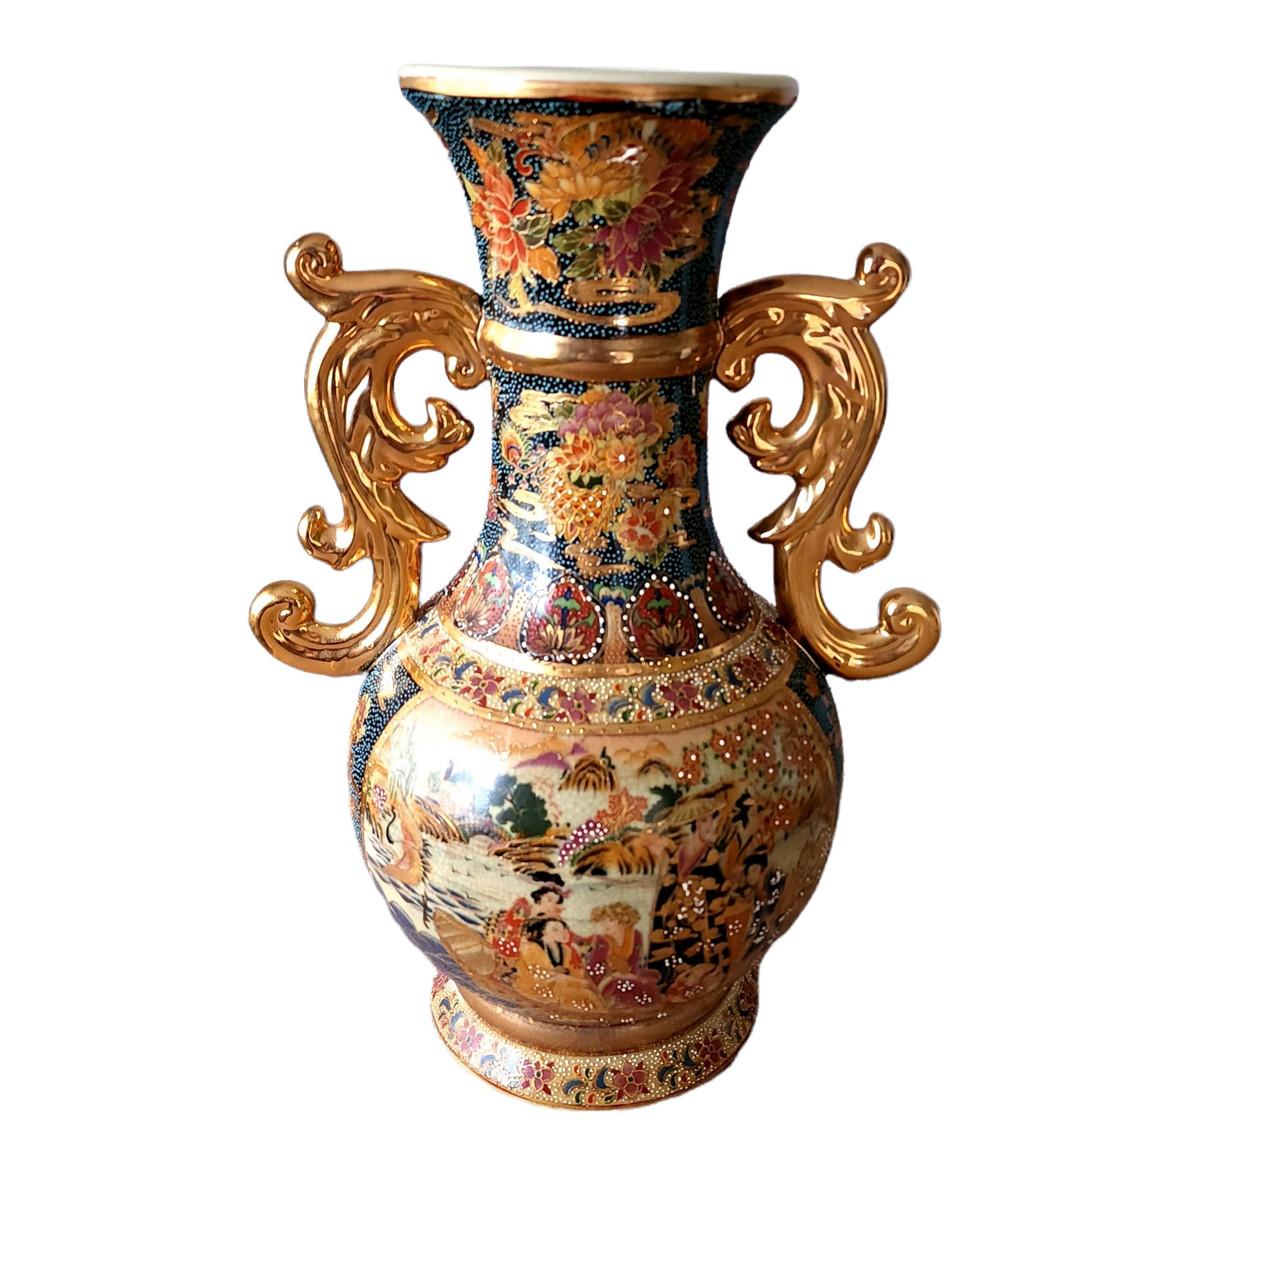 Satsuma Earthenware Gold Gilded Hand Painted Double Handle Vase

Tags Marks Hallmarks: Satsuma
Pattern: Gold Gilded
Material: Earthenware
Type or Style: Vase
Crafted In: China
Circa: 1900s
Item Height: 15 in
Condition Notes: Excellent, no chips or